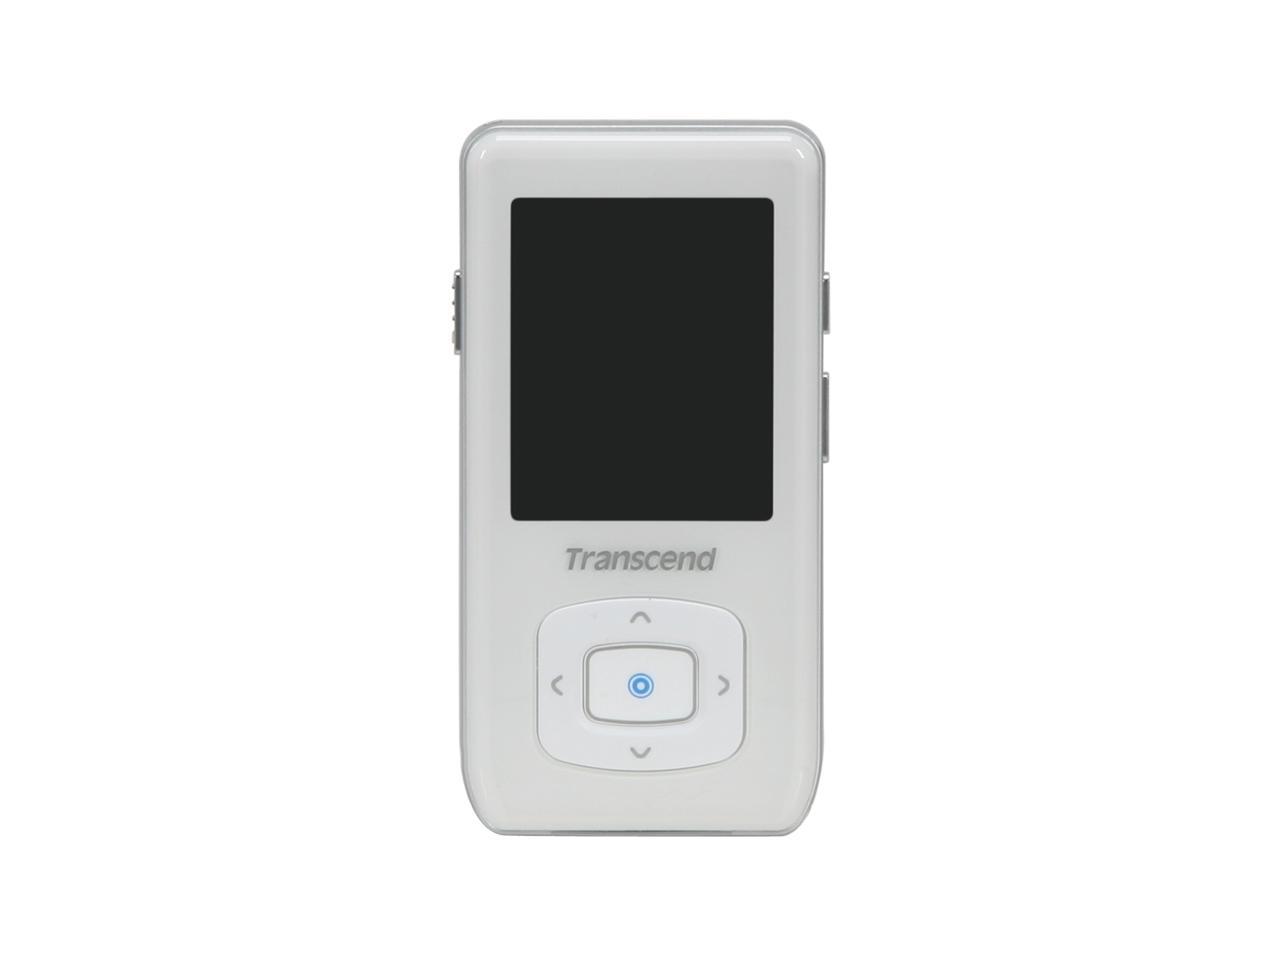 capsule Closely Twinkle Transcend T.sonic 1.8" White 4GB MP3 Player 850 - Newegg.com